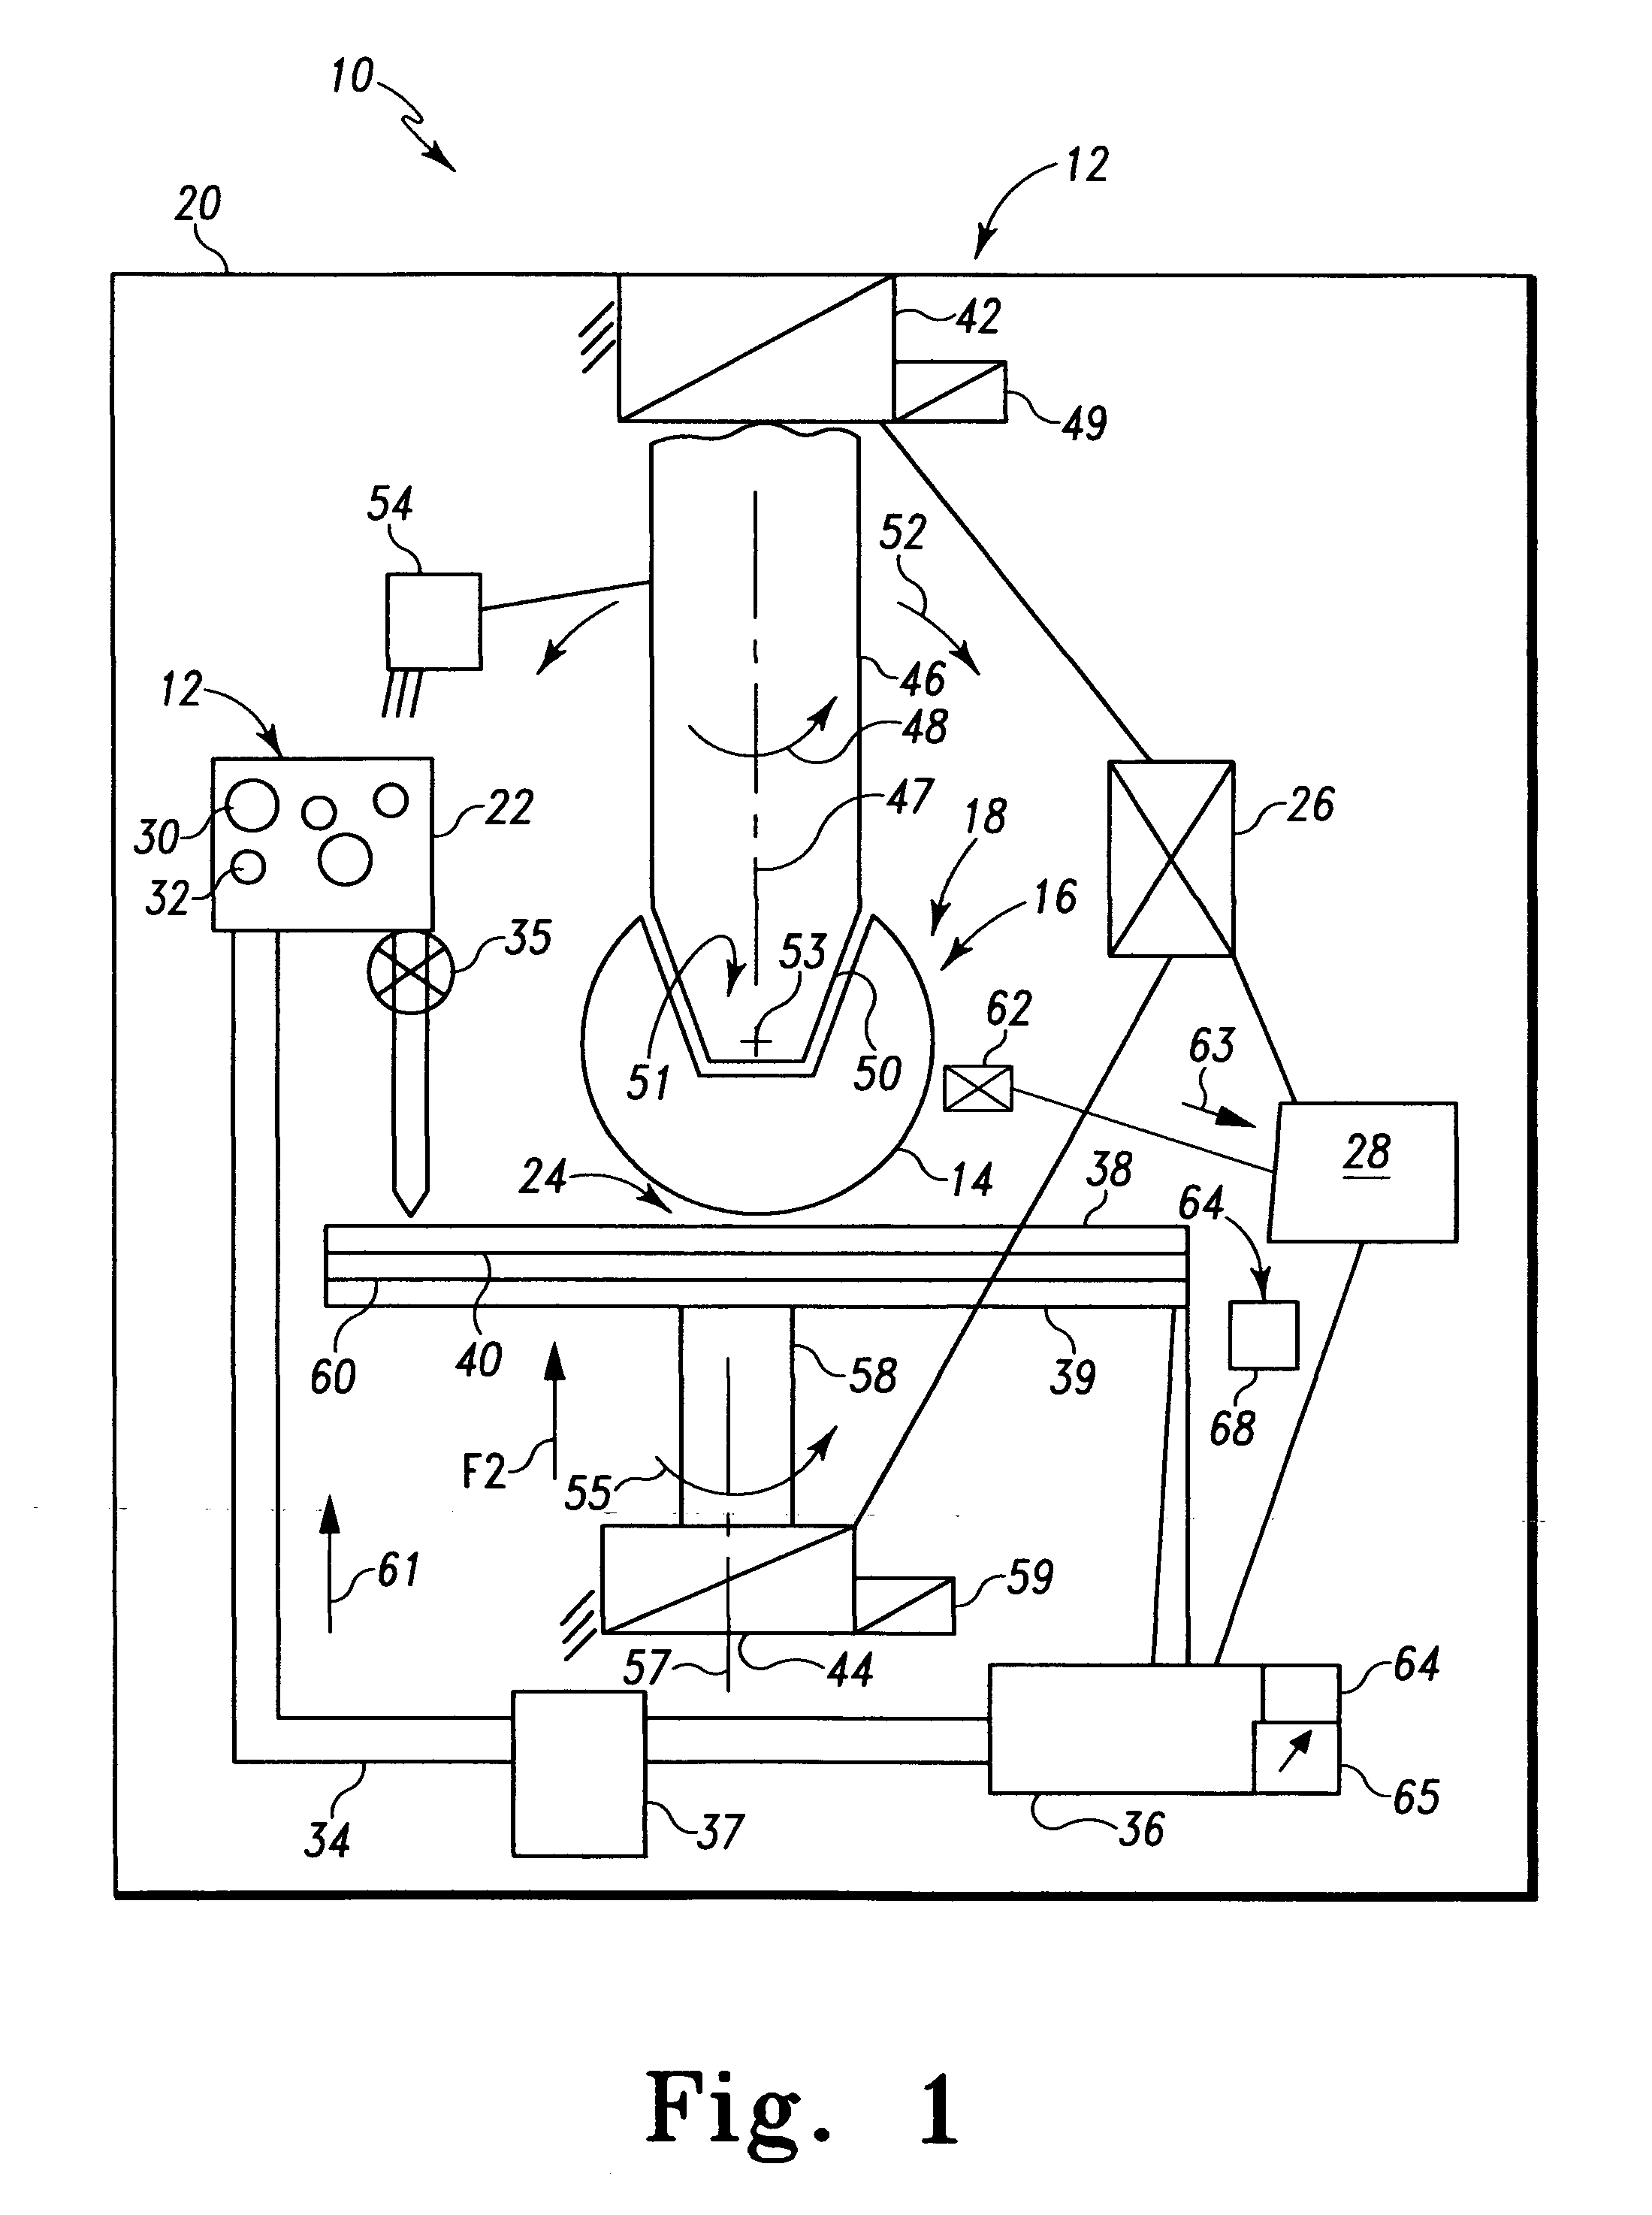 Orthopaedic component manufacturing method and equipment